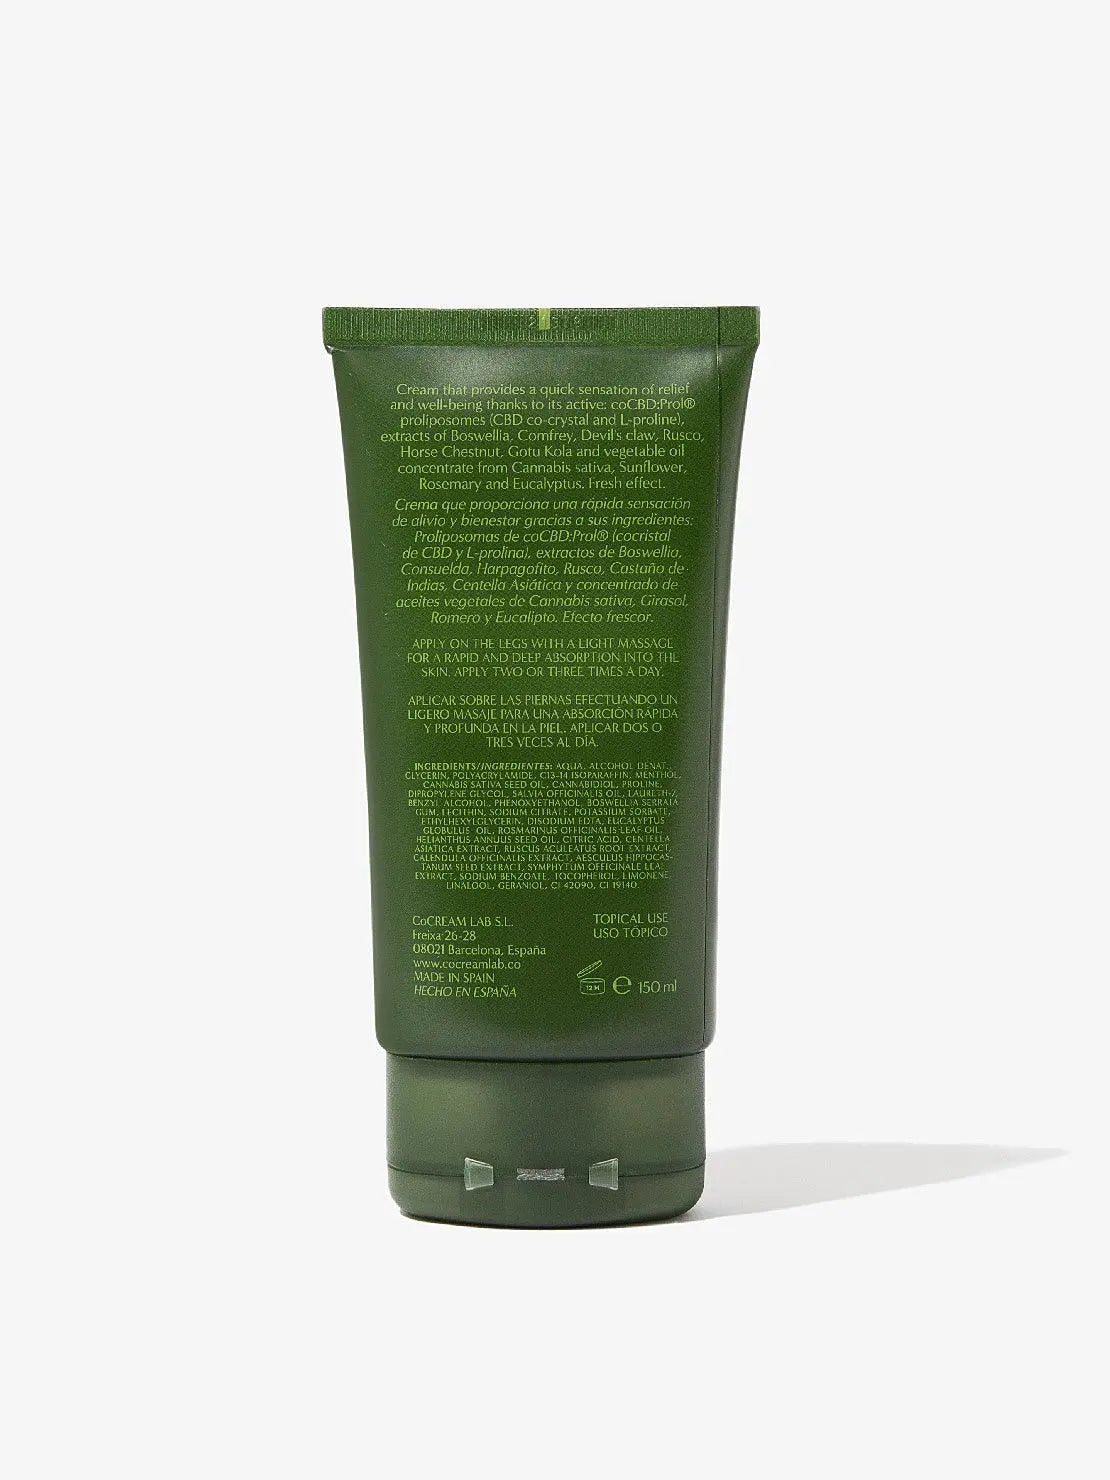 A green tube of Legs Cream 150ml by CoCream Lab with white text printed on the back. The text includes information about the product in multiple languages, ingredients, directions for use, and manufacturer details. Available at Bassalstore in Barcelona, the tube stands upright on a white background.